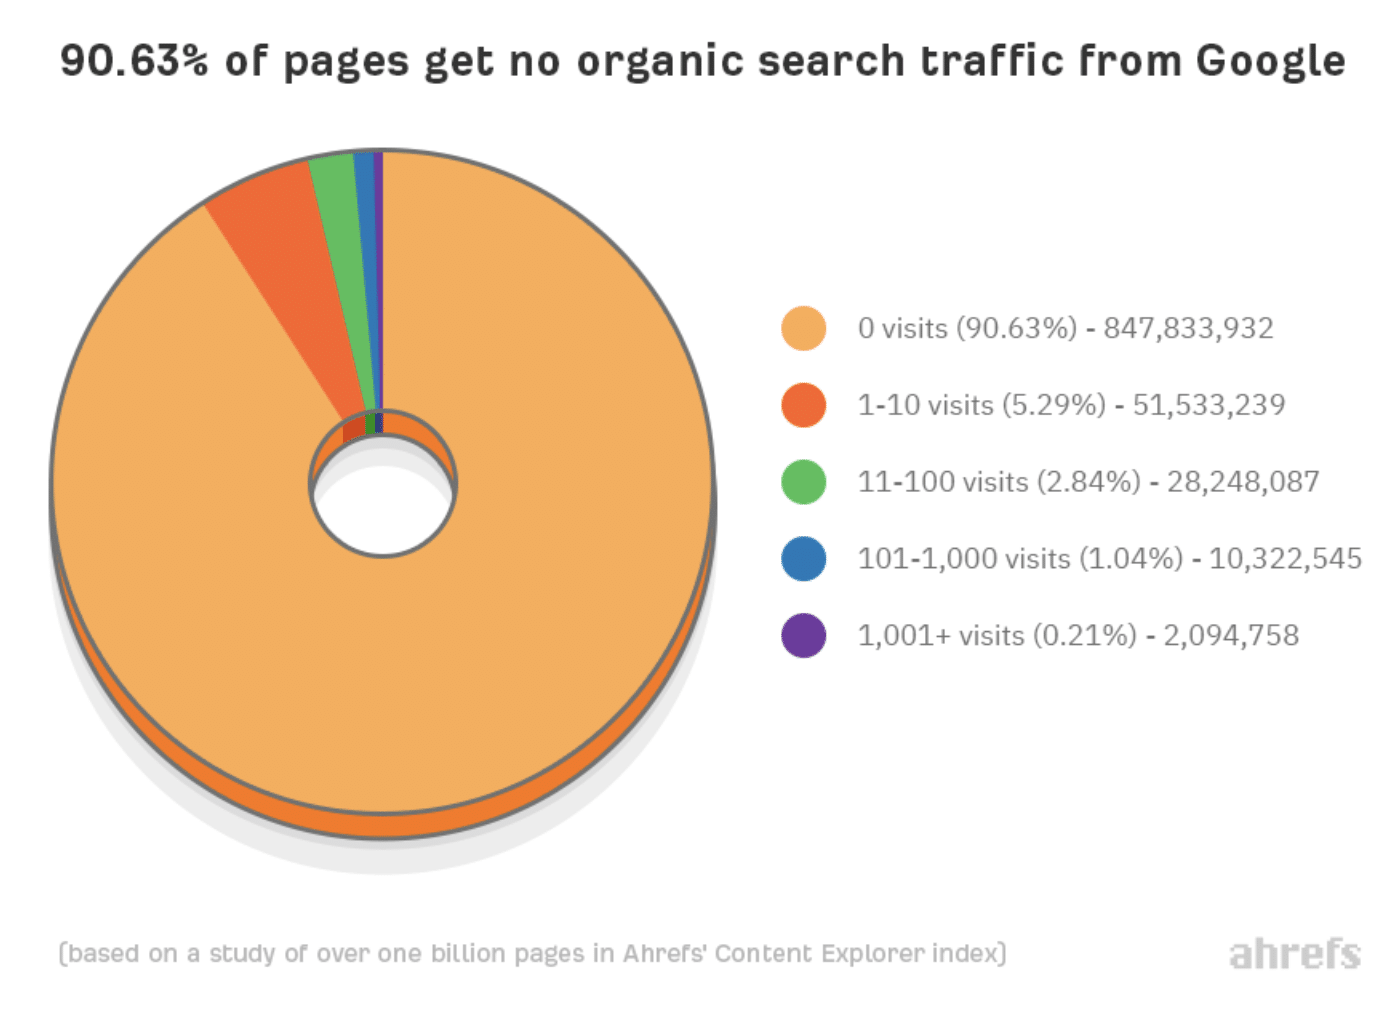 graph shows that 90.63% of pages get no organic search traffic from Google